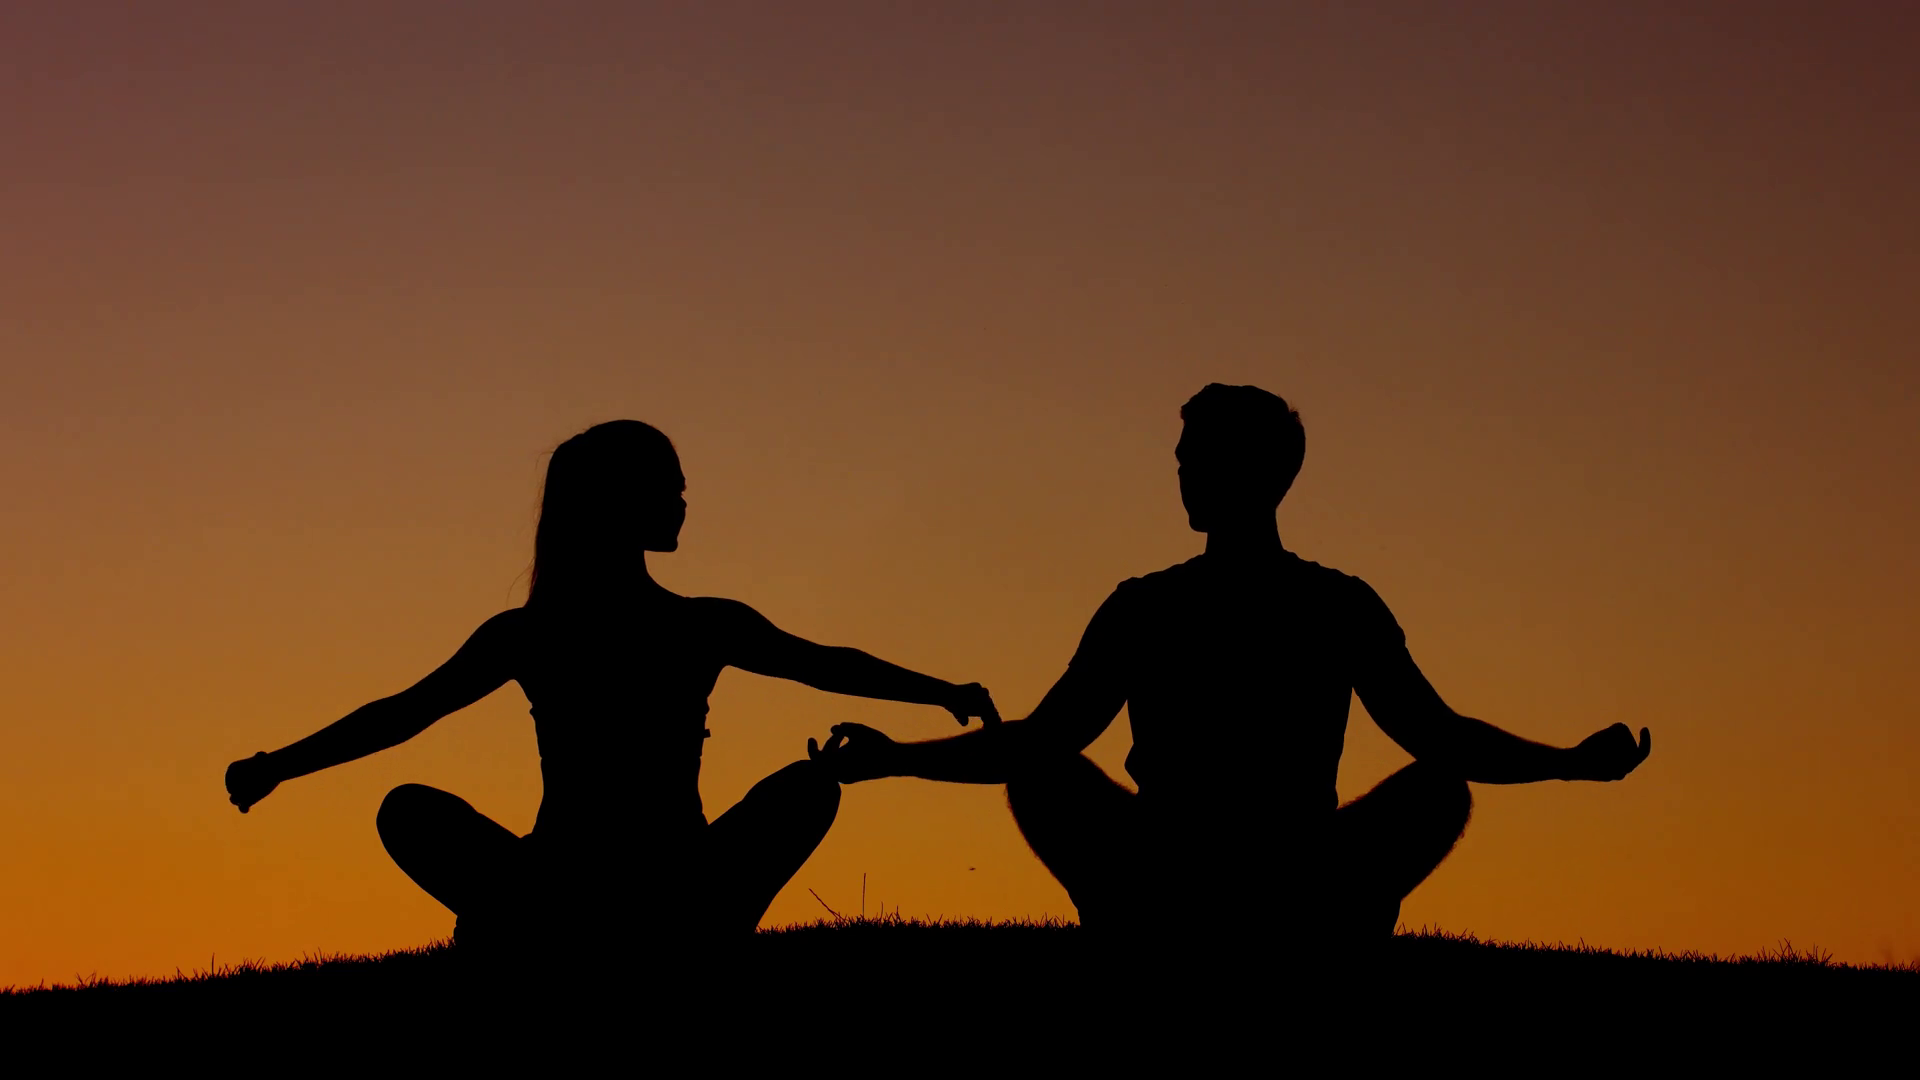 boy-and-girl-engage-in-yoga-on-the-nature-a-man-and-a-woman-meditating-in-the-mountains-people-relax-at-sunset_hkmosmfrx_thumbnail-full01